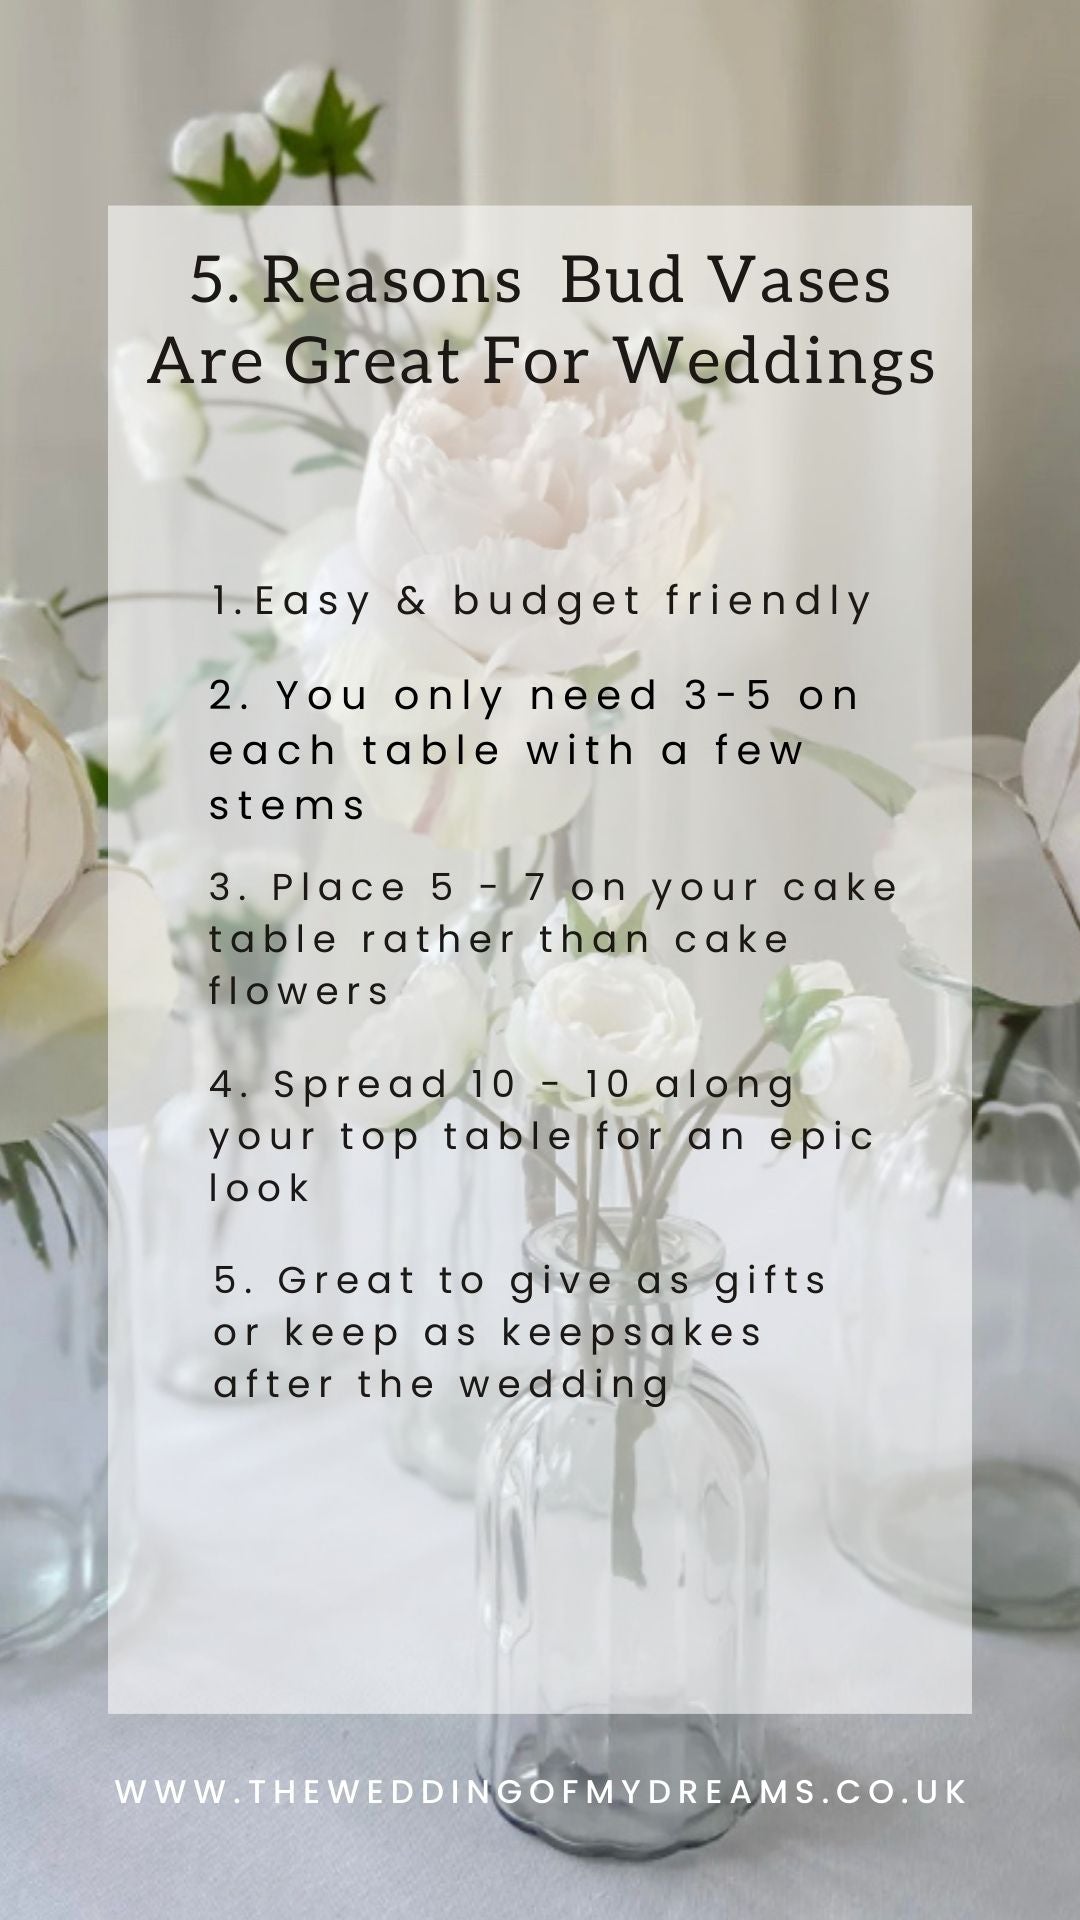 5 Reasons Bud Vases are Great For Weddings